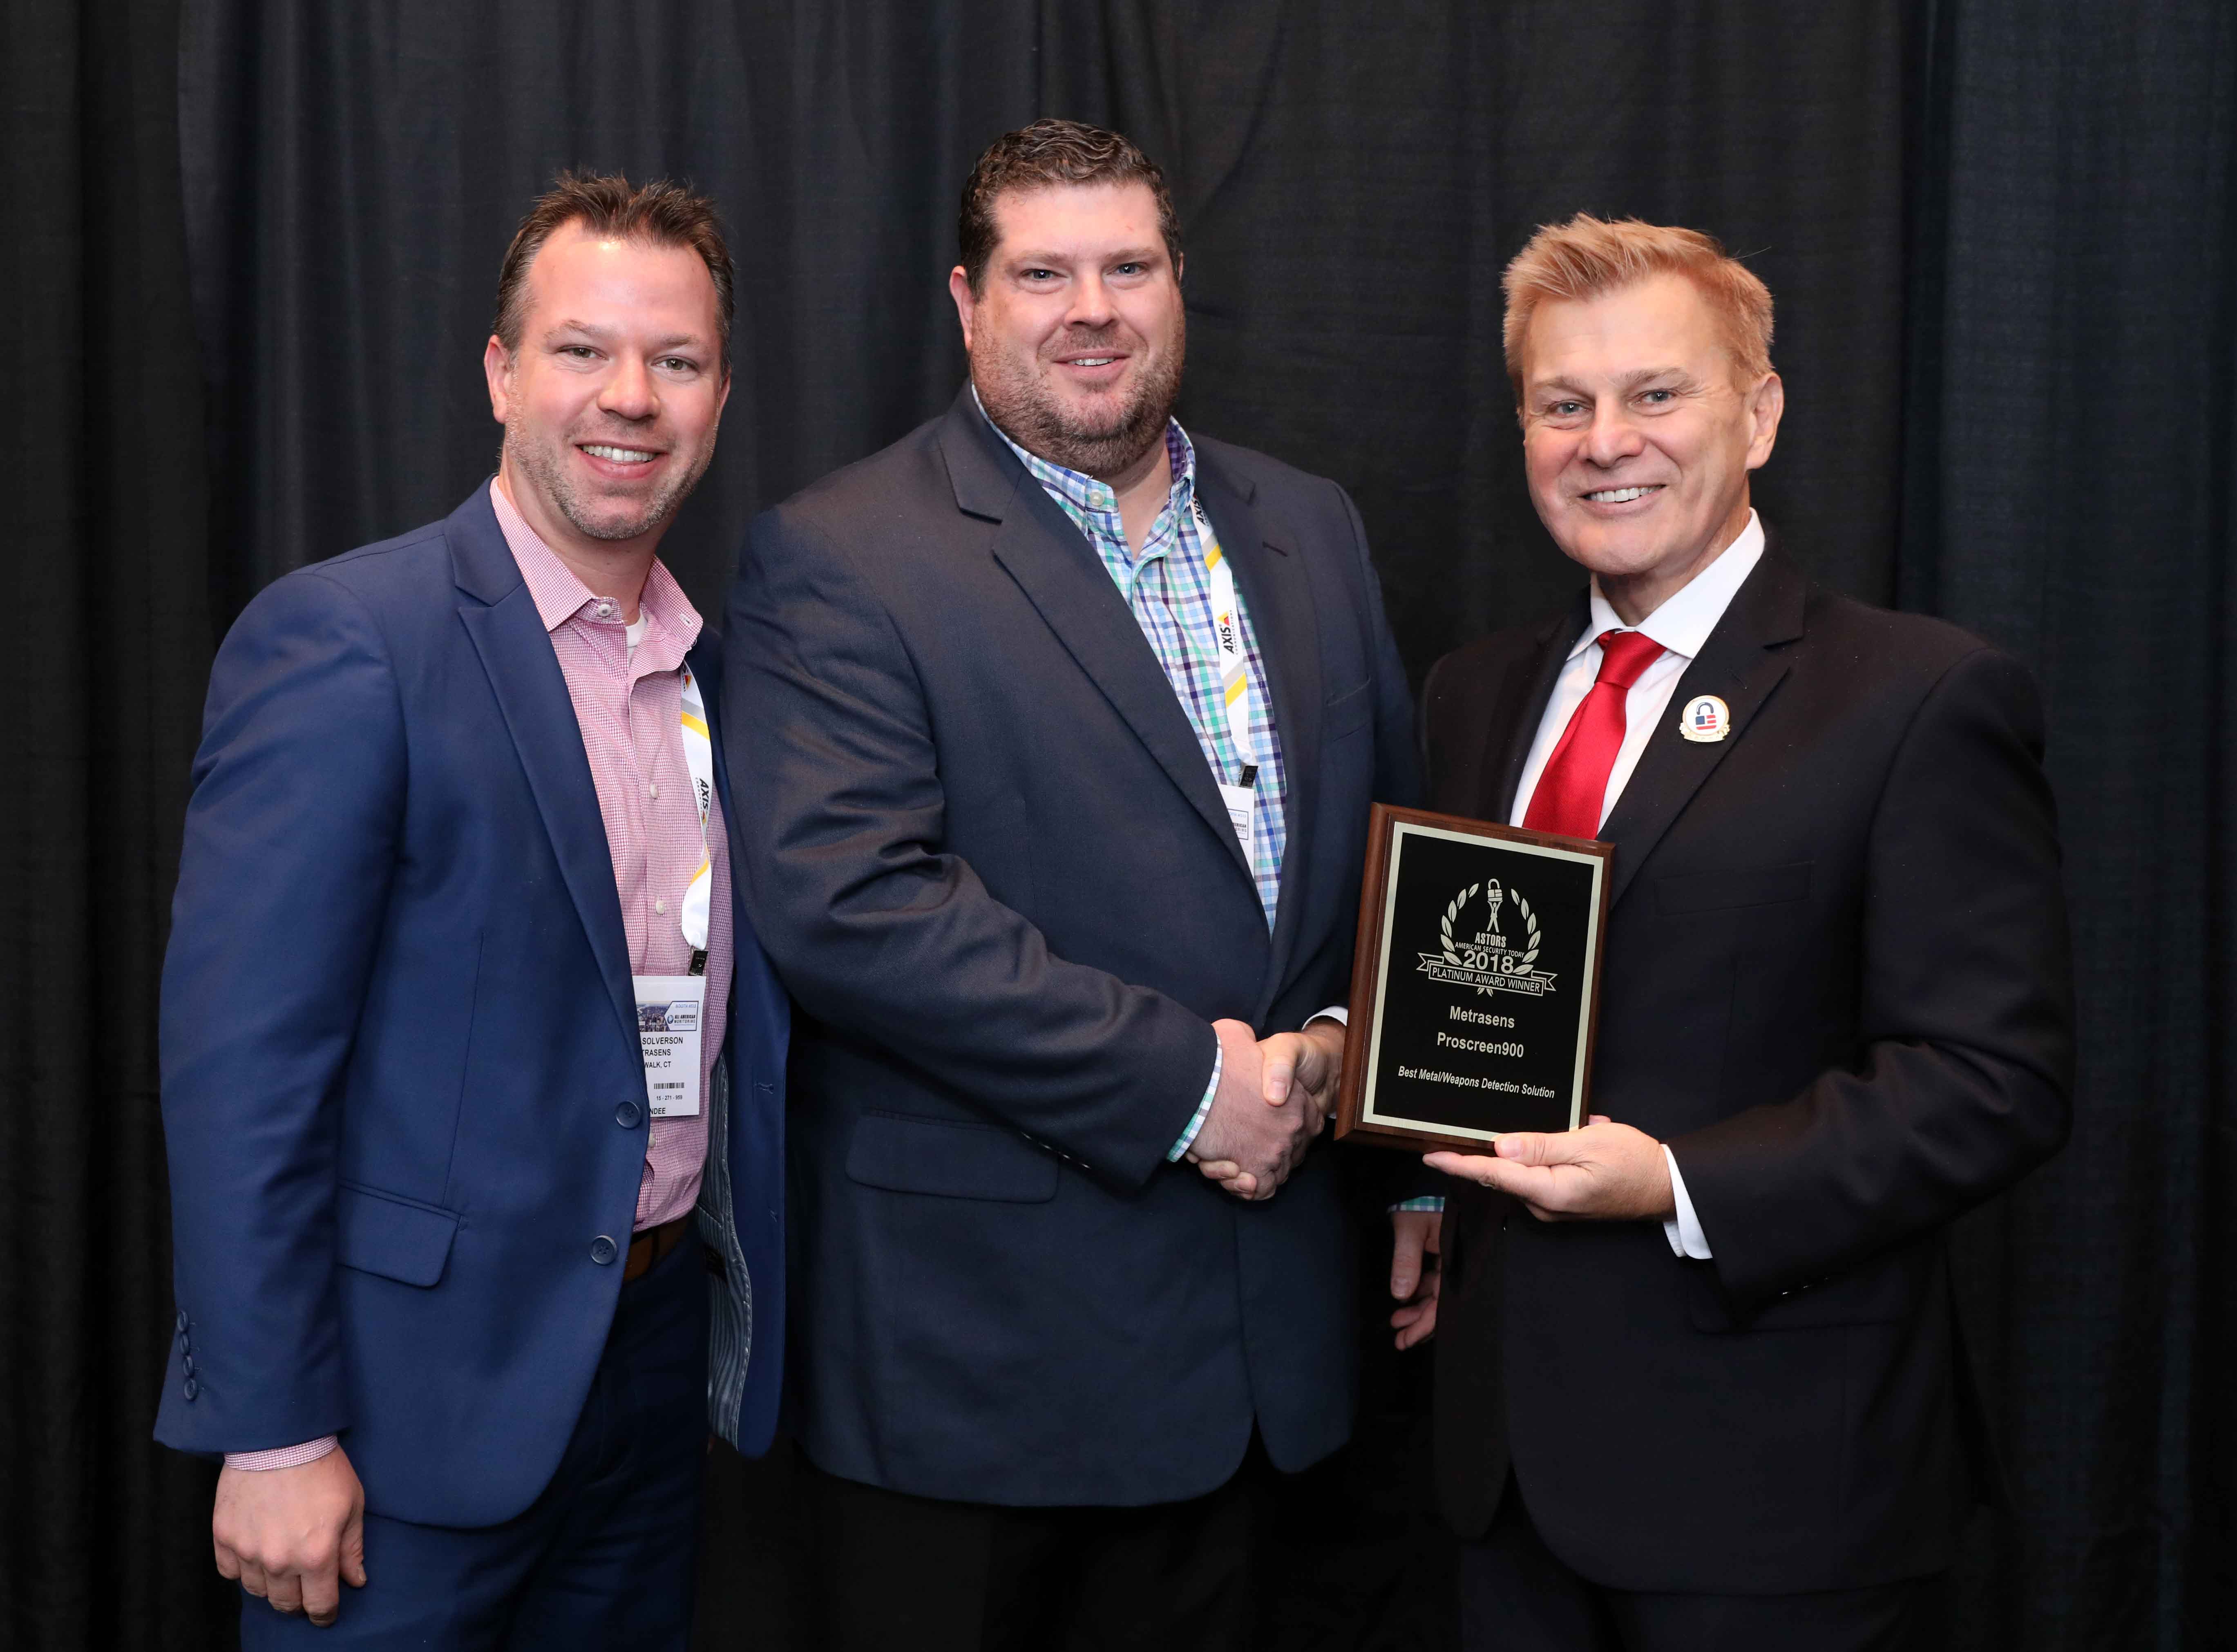 Dan Kuzniewski, Director of Marketing (center), with Brian Solverson, Key Acct Mgr, US High Security (at left), accepting the 2018 Platinum ‘ASTORS’ Homeland Security Award for Best Metal/Weapons Detection Solution at ISC East.